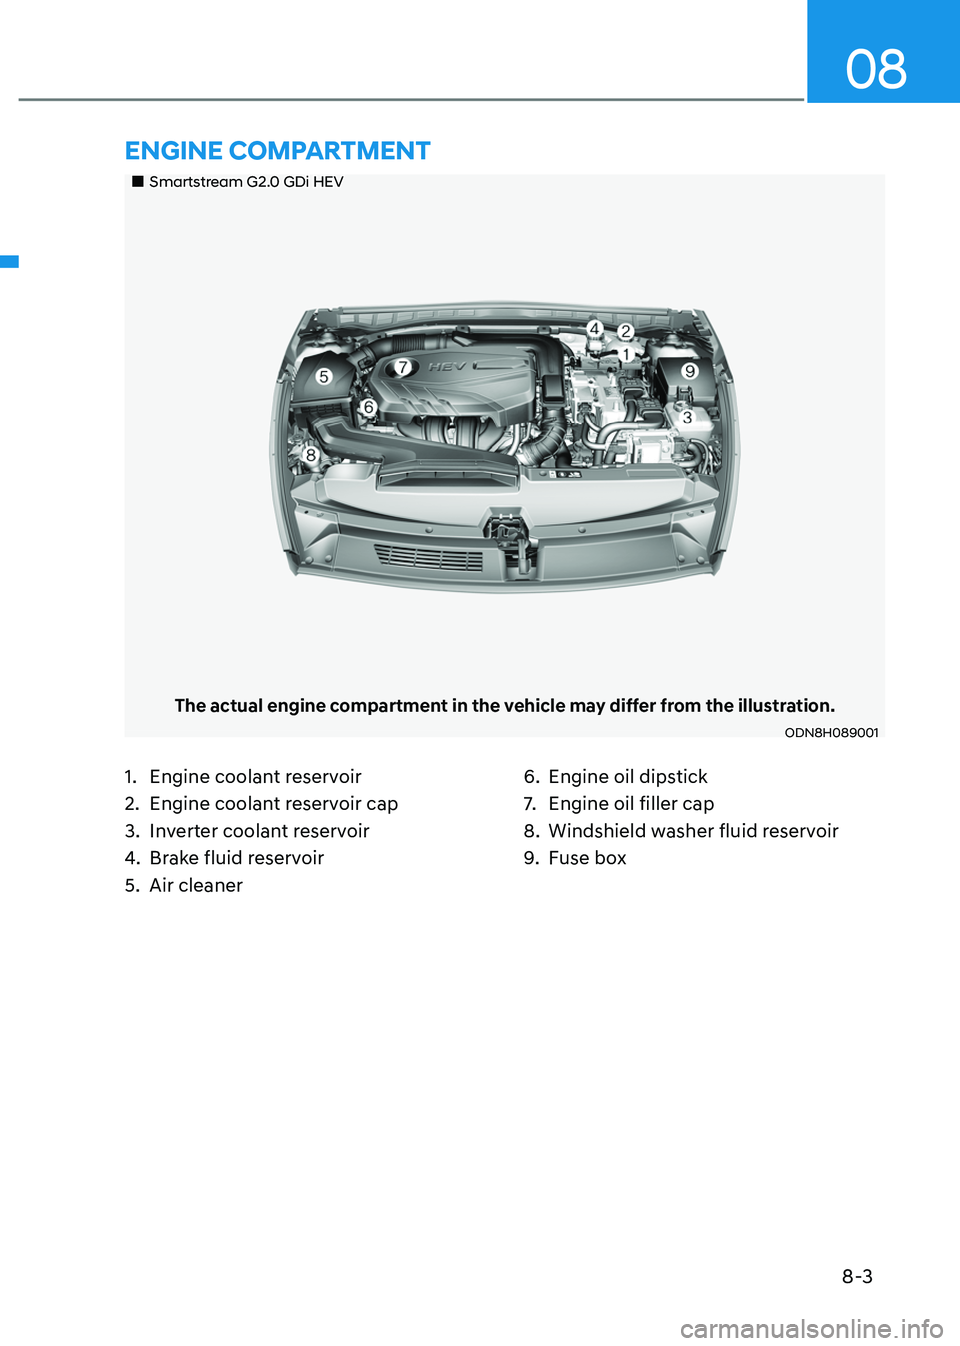 HYUNDAI SONATA HYBRID 2022  Owners Manual 8-3
08
„„Smartstream G2.0 GDi HEV
The actual engine compartment in the vehicle may differ from the illustration.
ODN8H089001
1. Engine coolant reservoir
2. Engine coolant reservoir cap
3. In